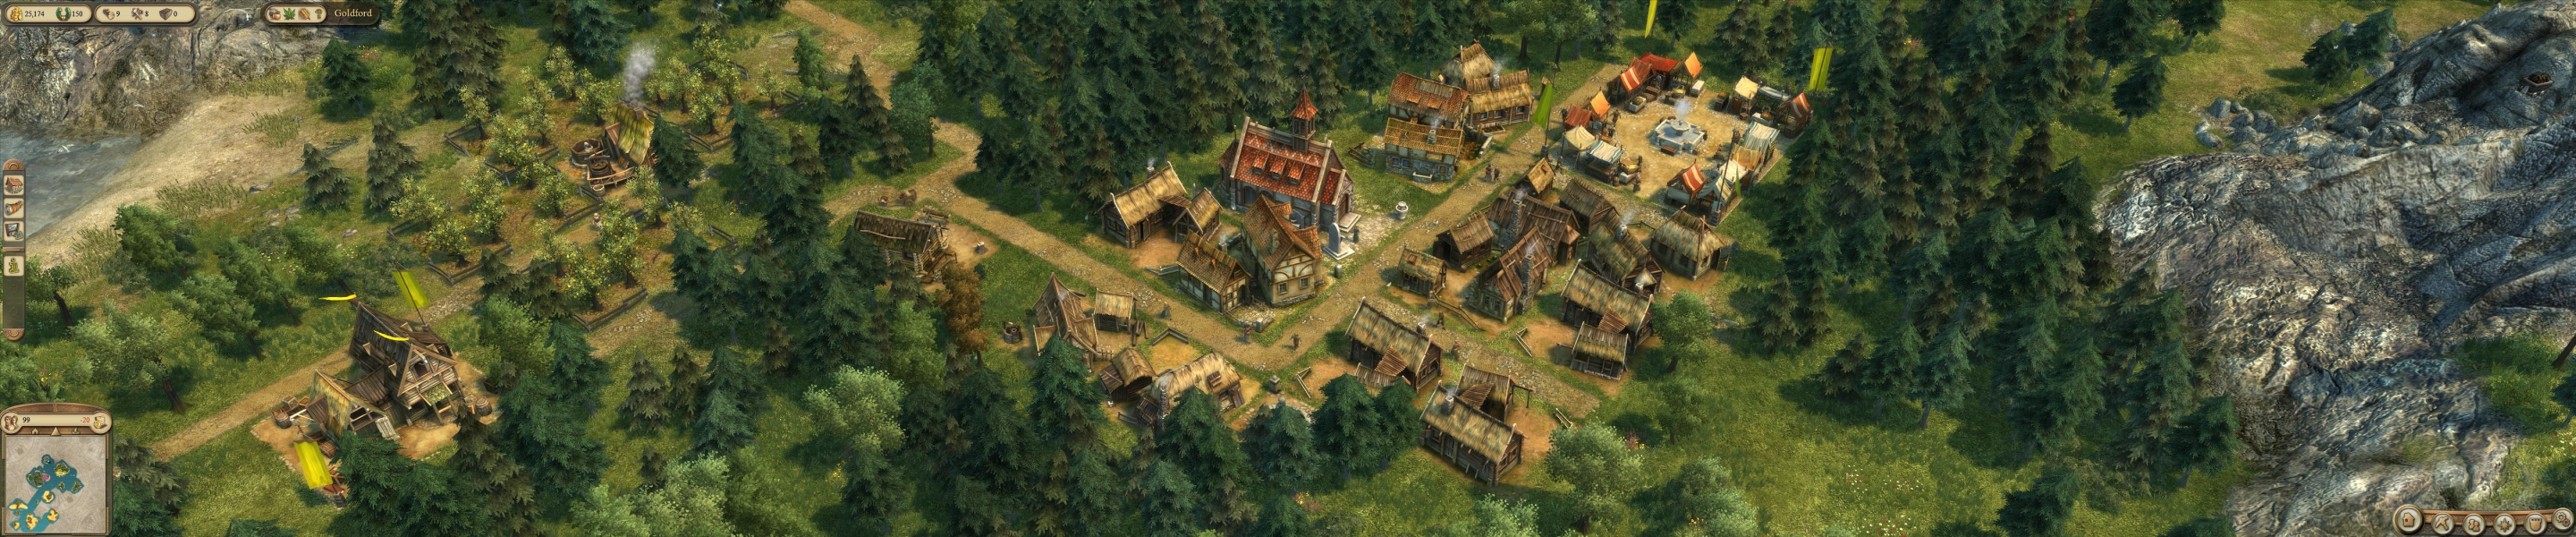 Is anno 1404 on steam фото 37